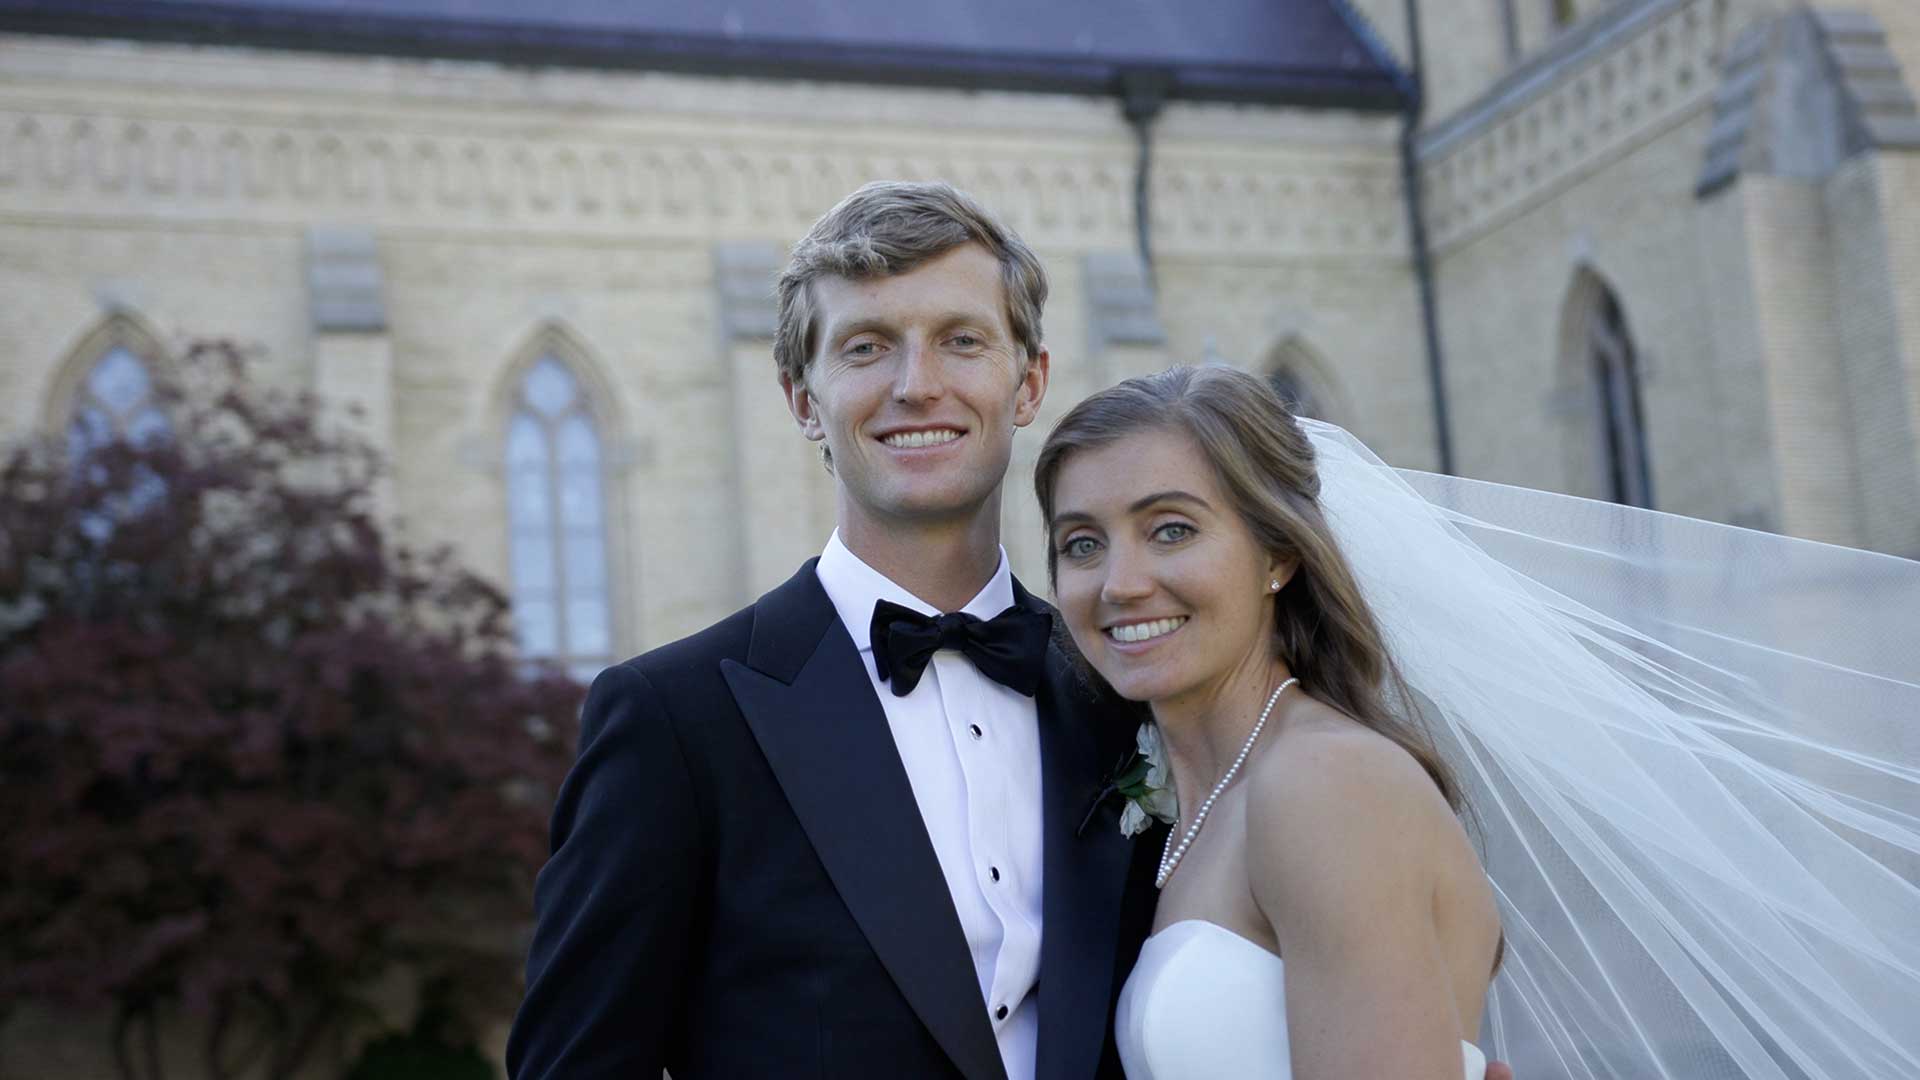 Wedding at Notre Dame University. Met in Indiana fell in love and married at the Basilica!